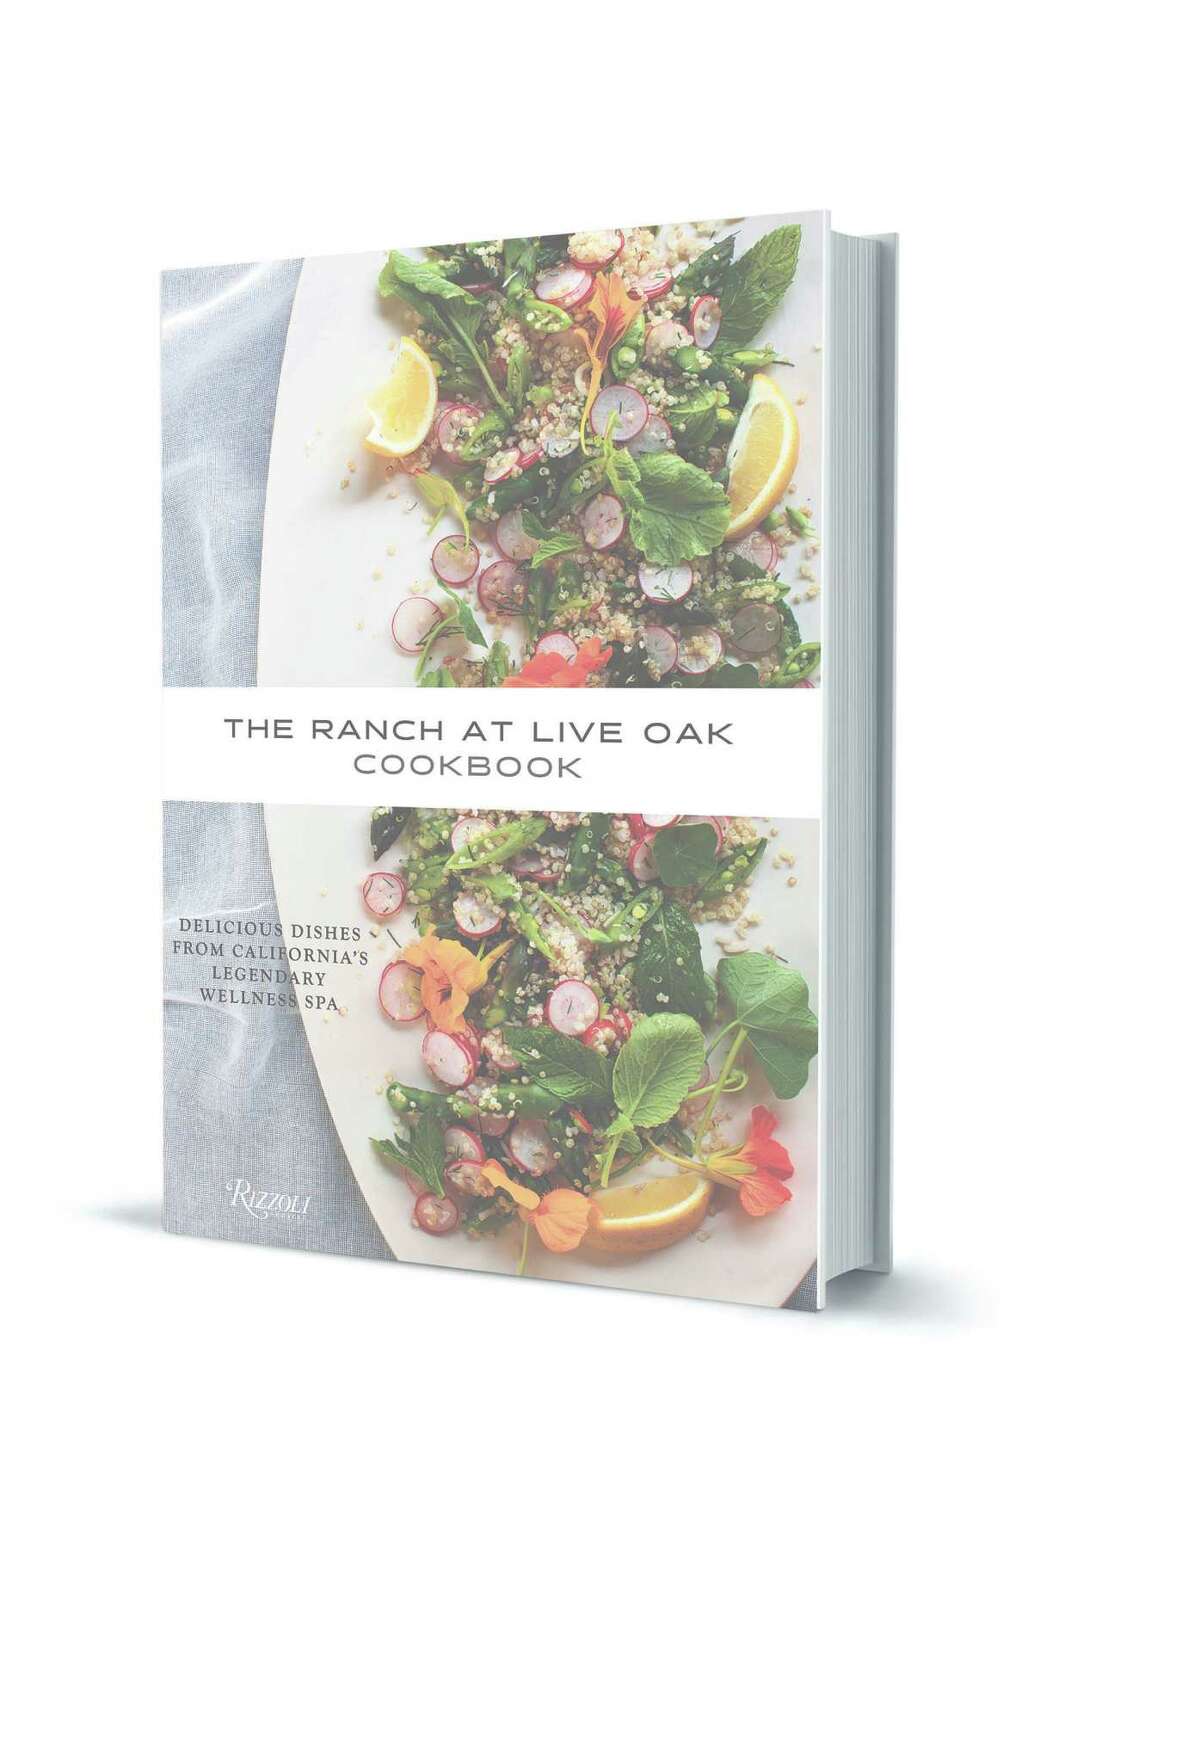 The Ranch at Live Oak Cookbook by Sue an Alex Glasscock, 224 pages, photography by Sara Remington, $35.